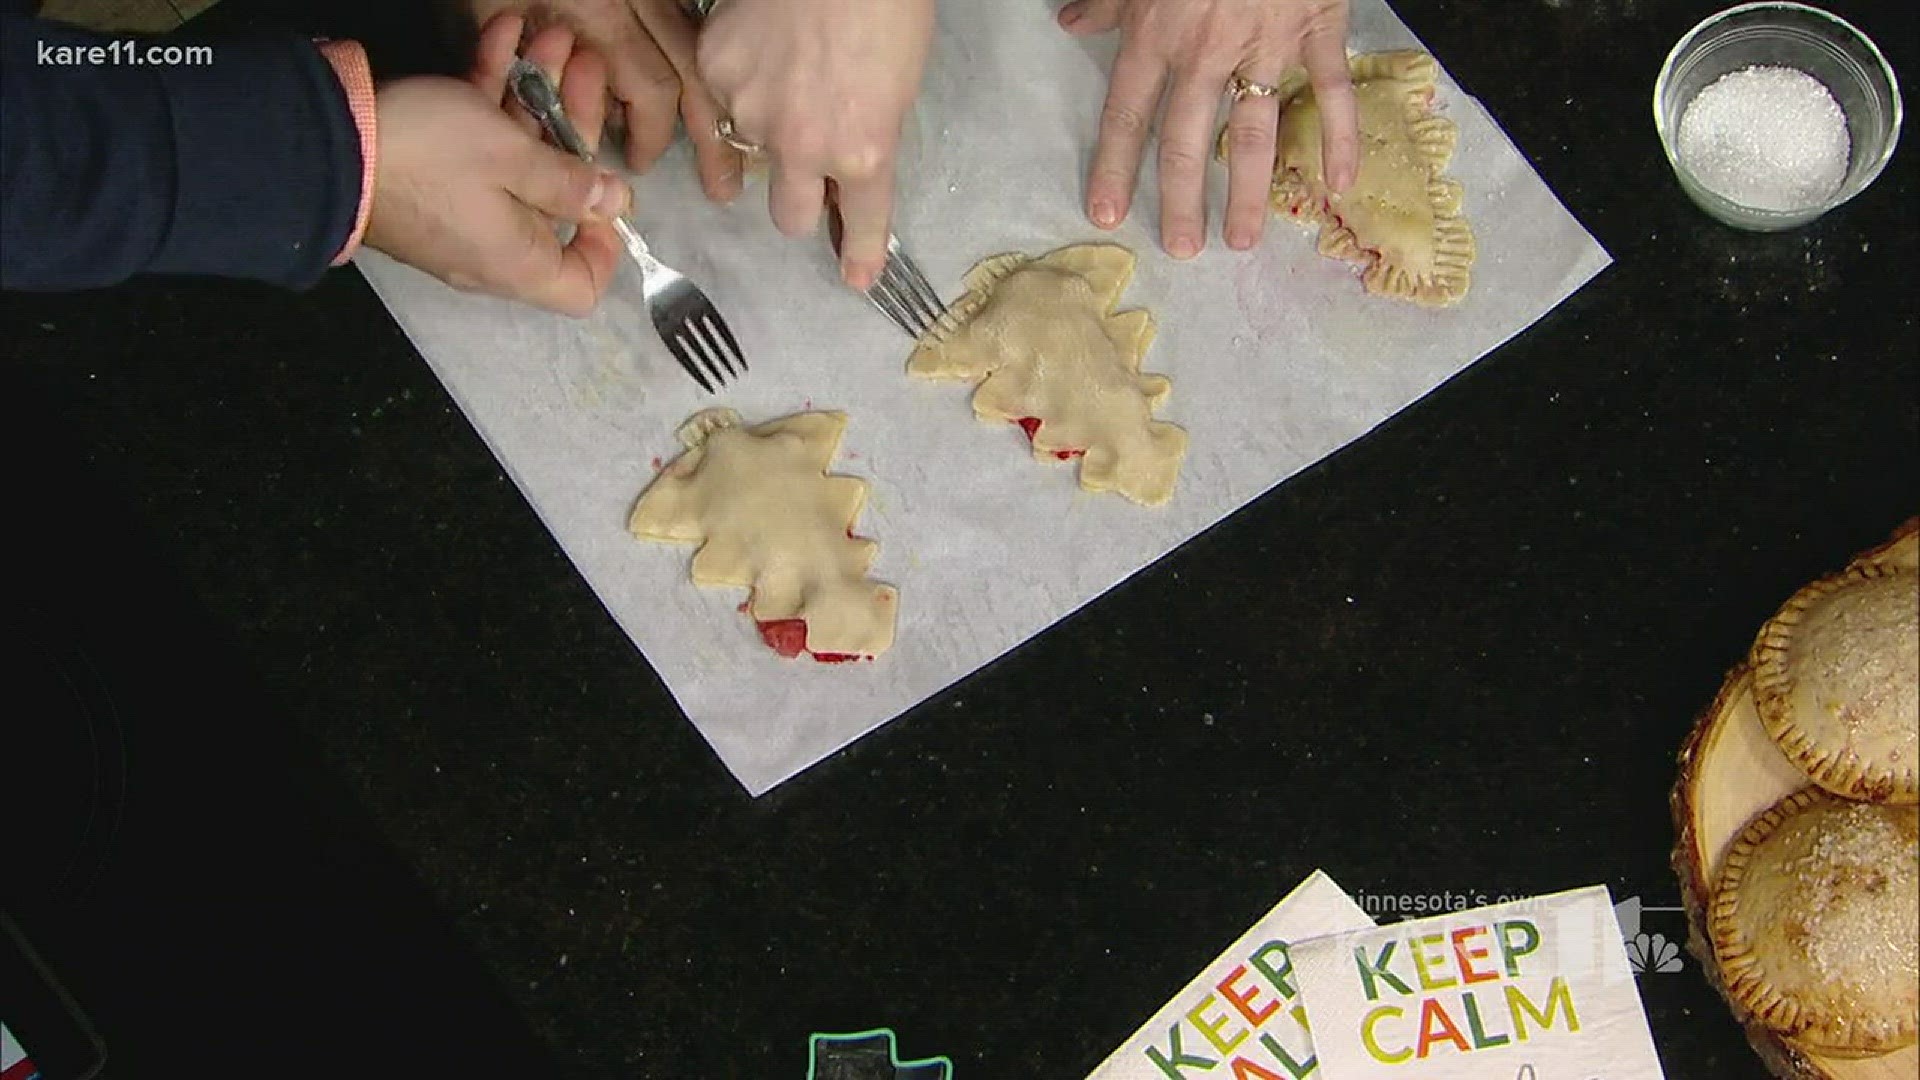 KARE bakes alcohol-infused pies with Sara's Tipsy Pies.